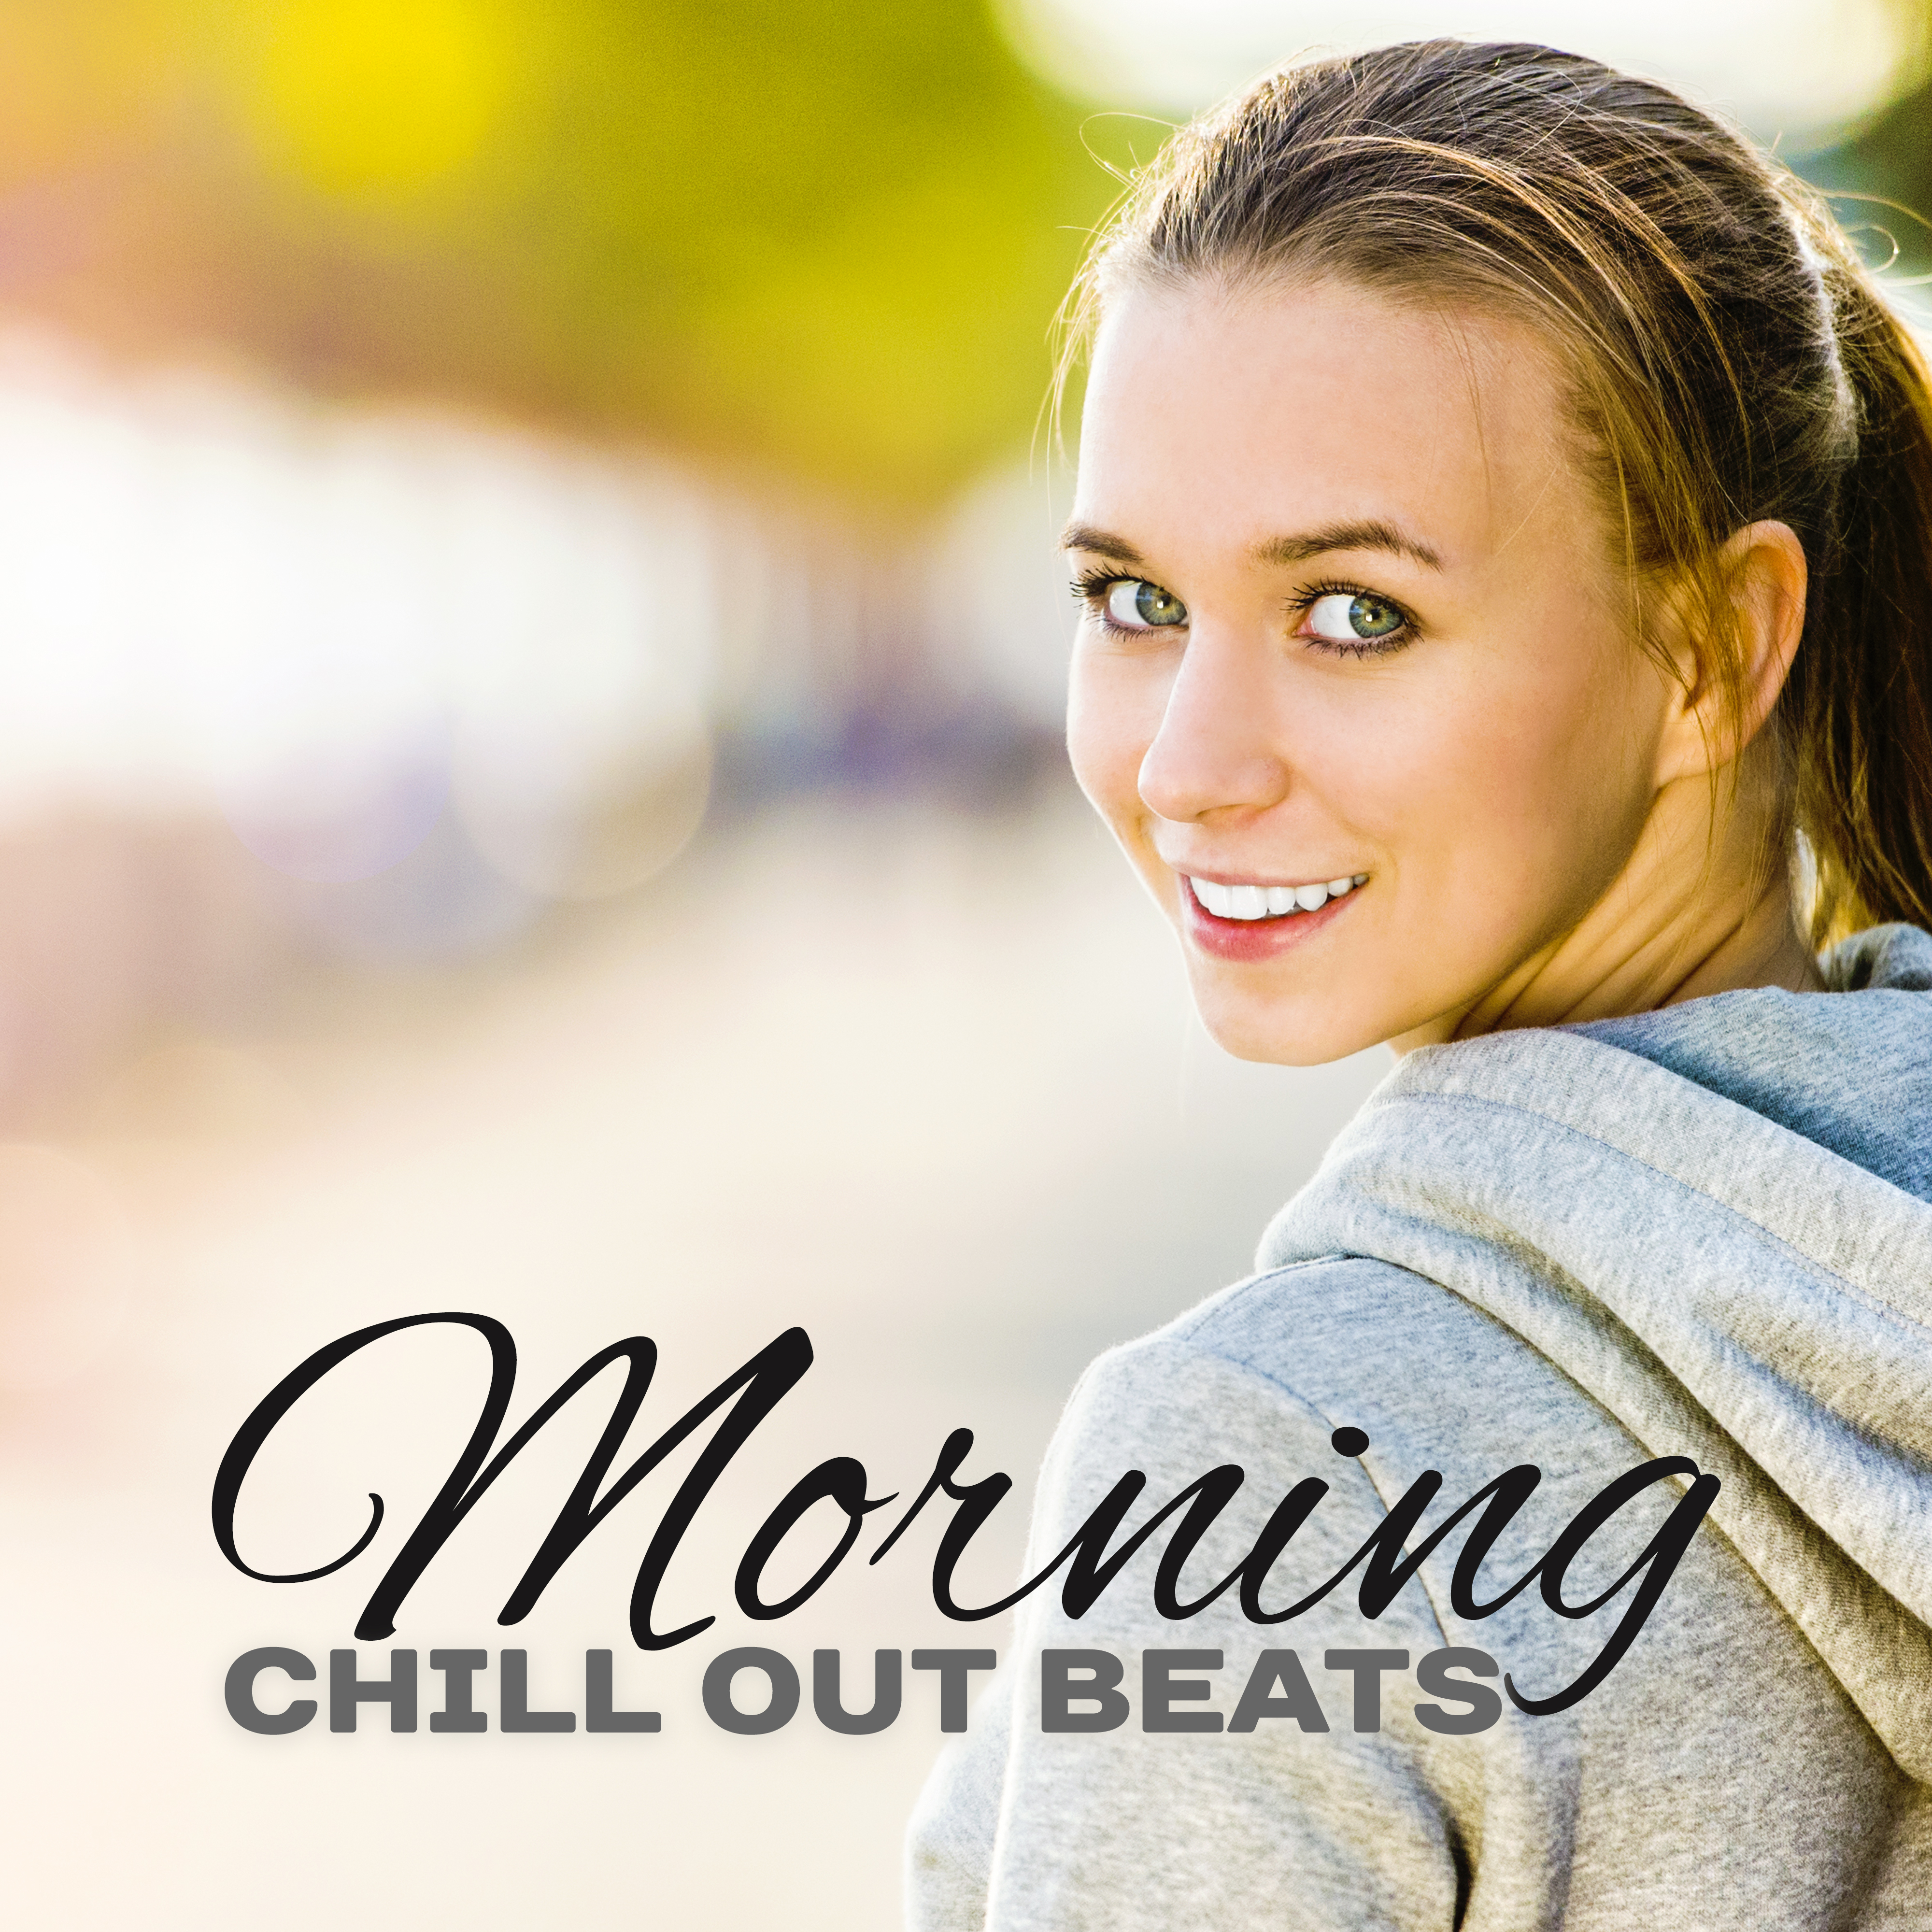 Morning Chill Out Beats – Rest Music, Sunrise Chillout, Beach Relaxation, Morning Waves, Summer Sounds